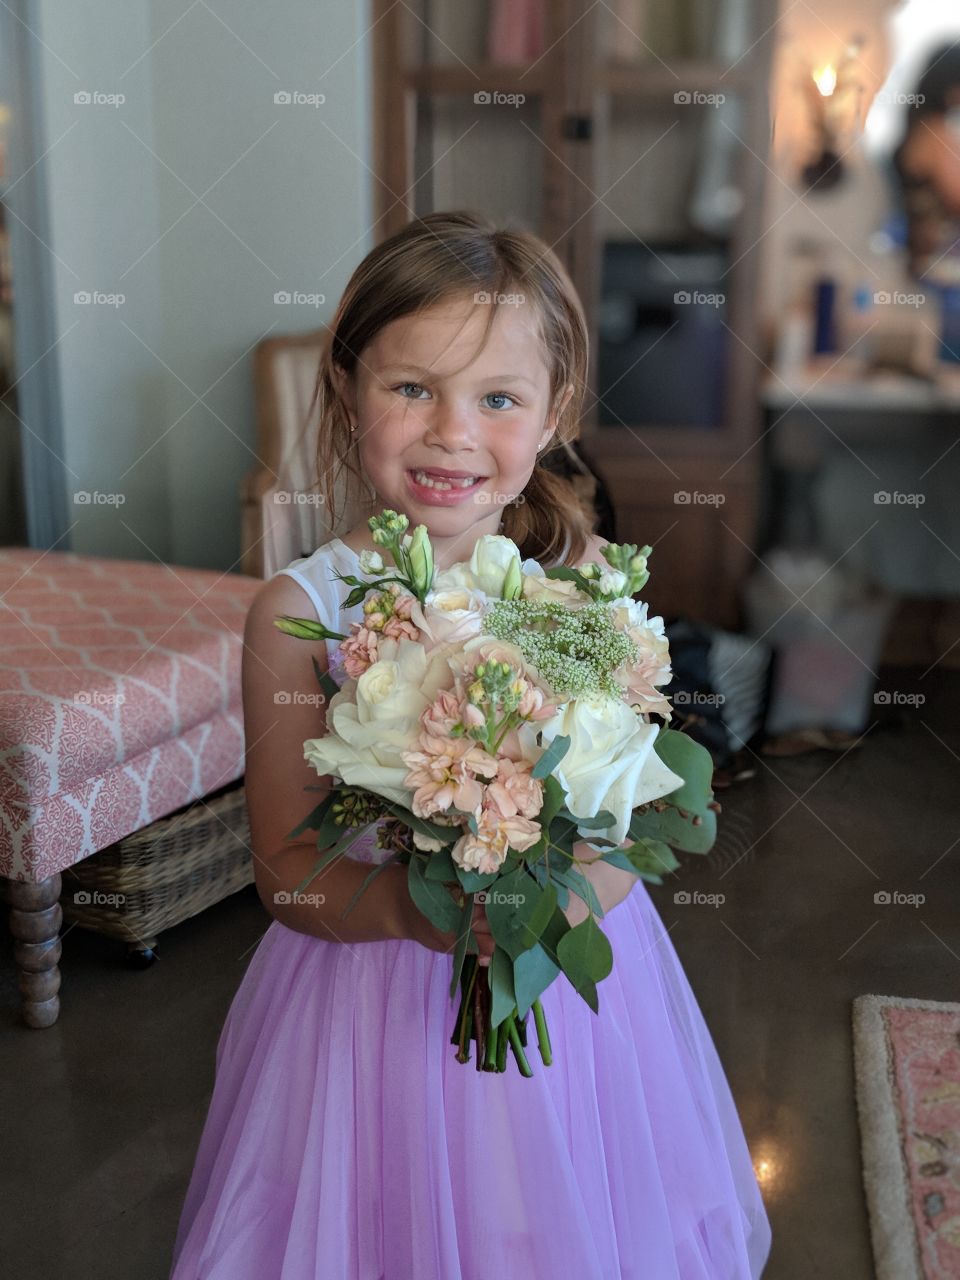 flower girl with a genuine smile